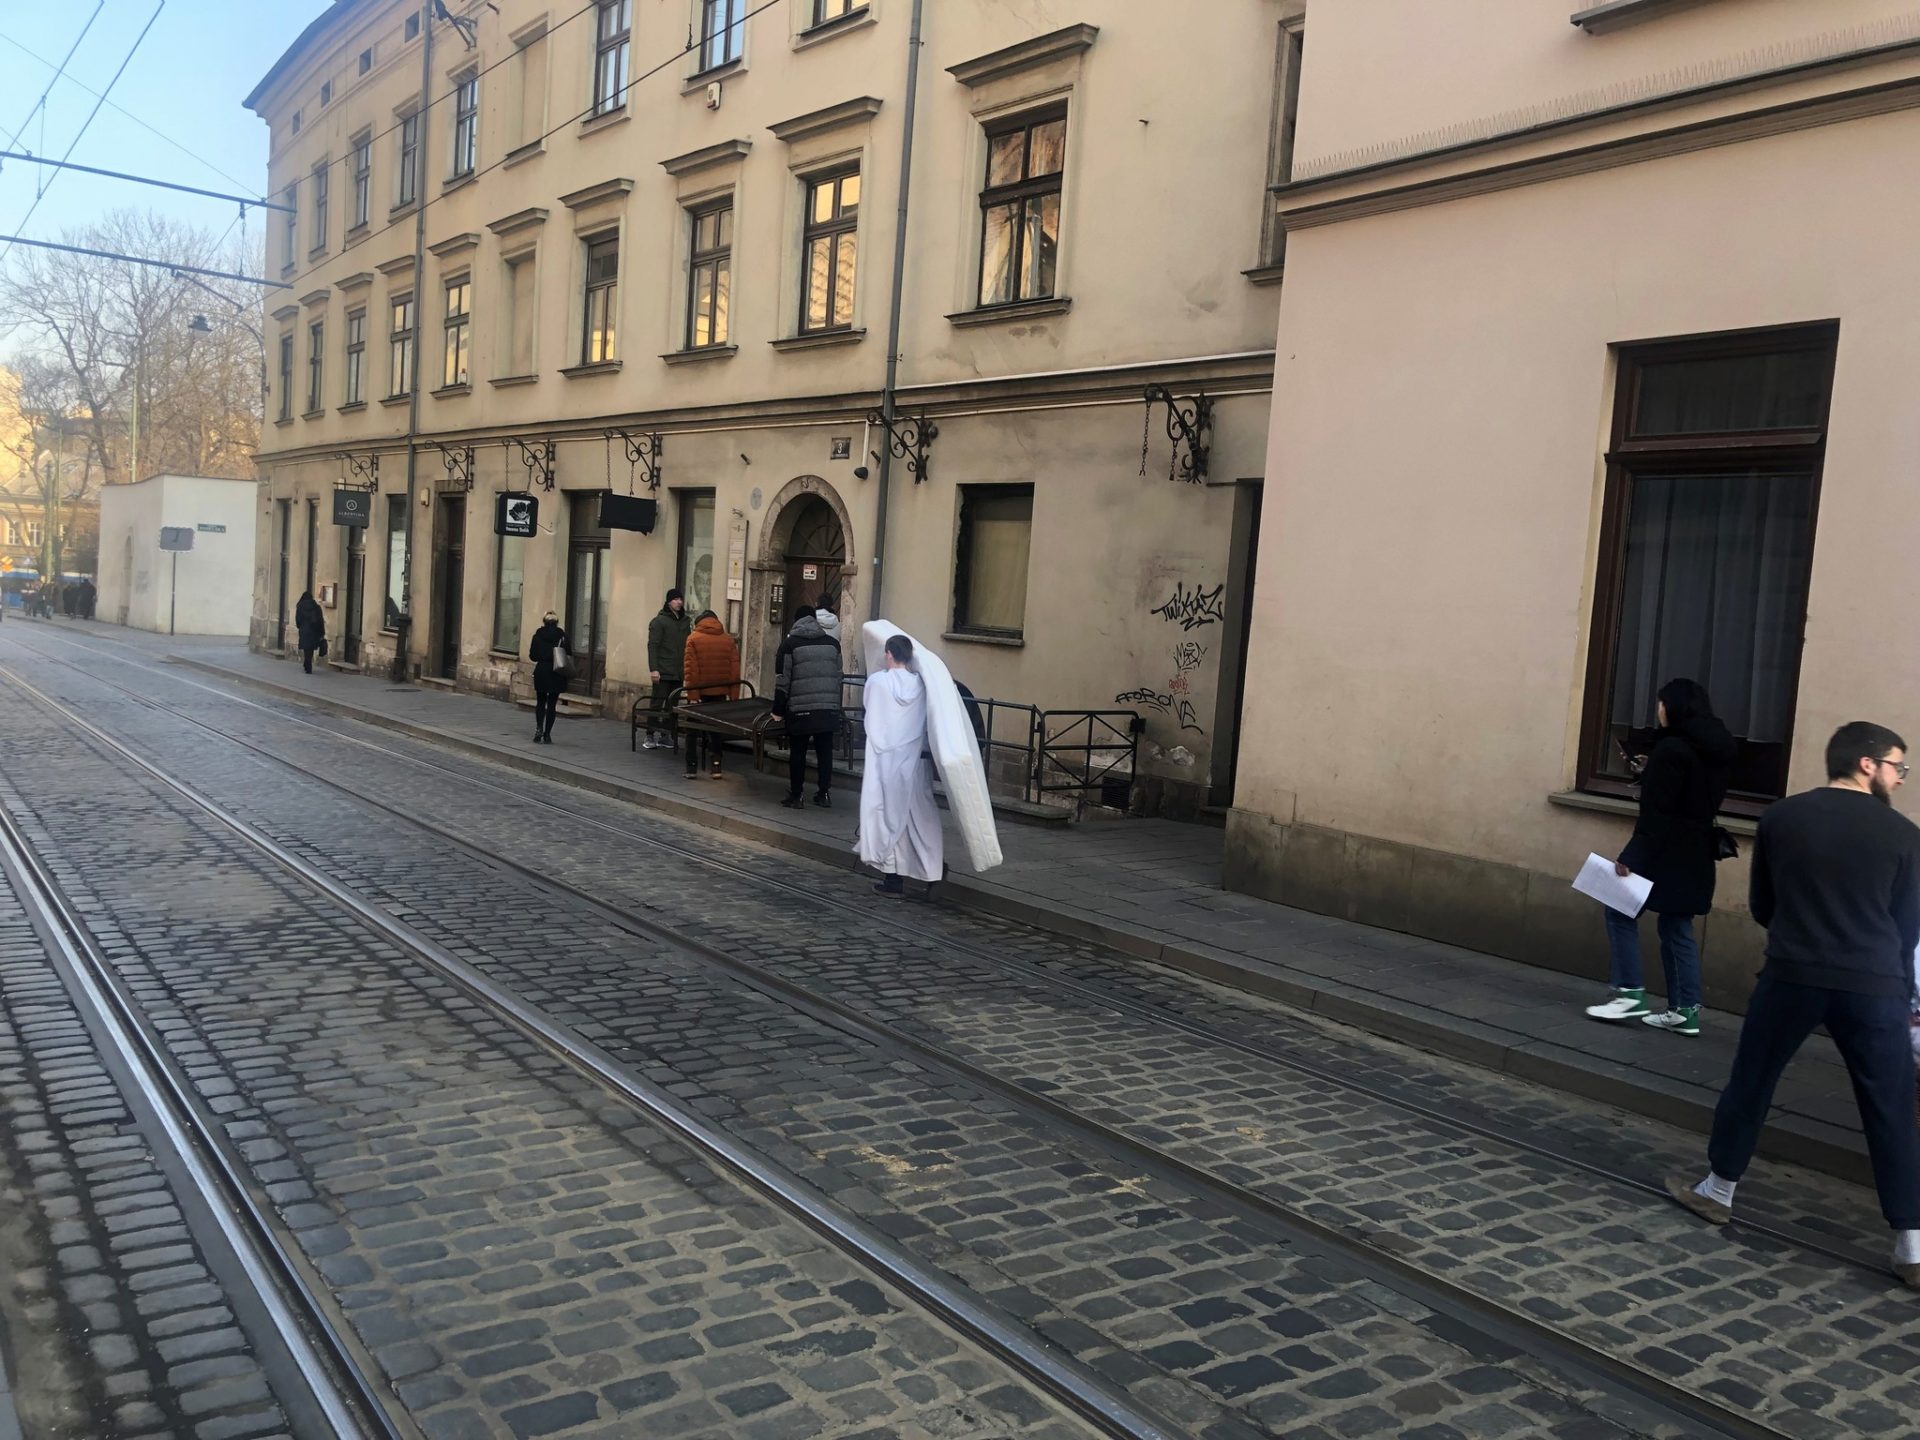 Father Andrzej carries a mattress to an apartment for refugee families